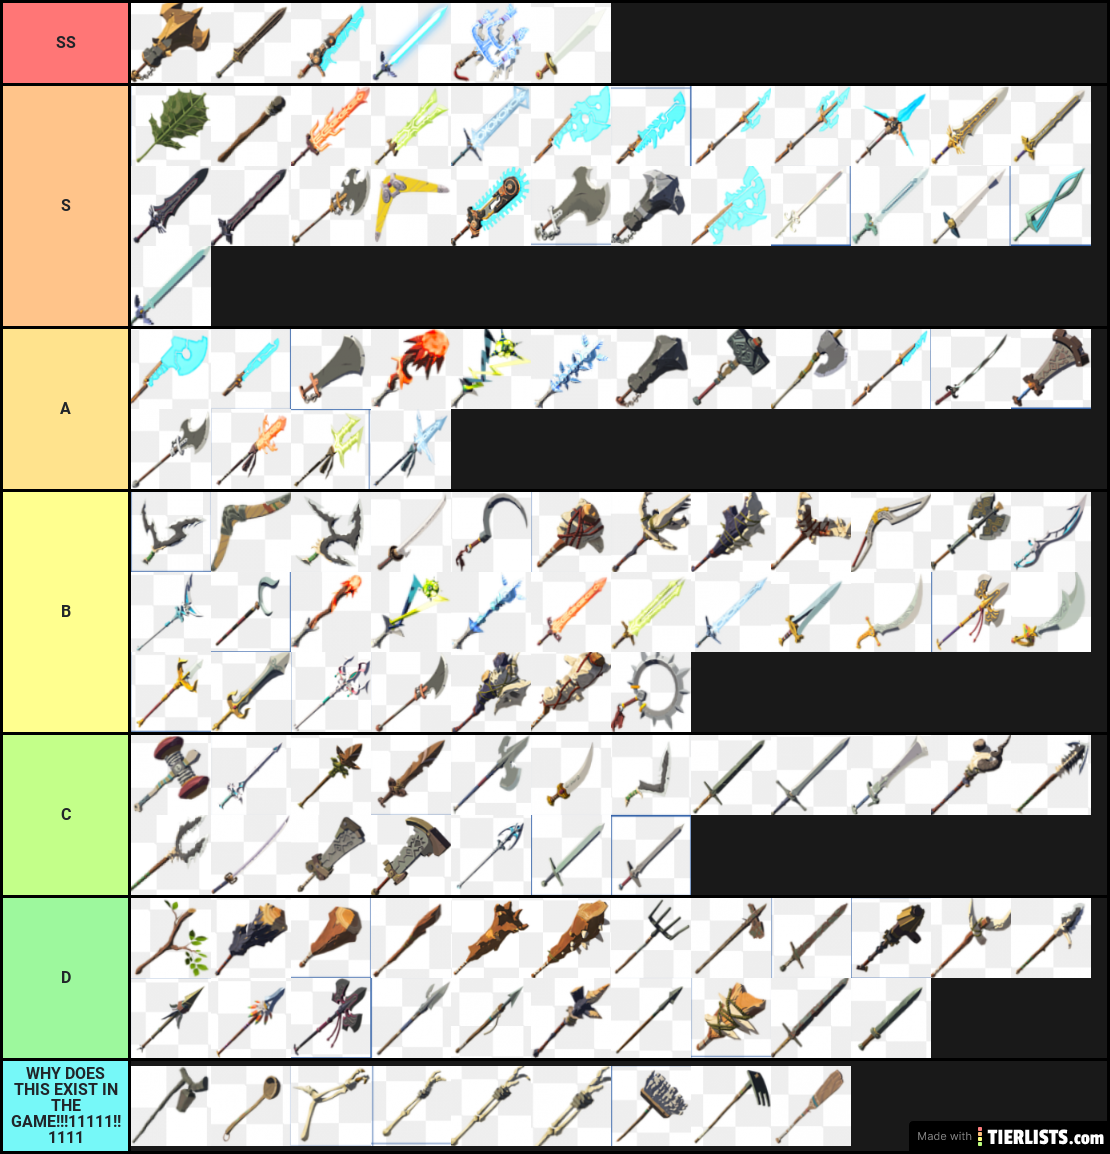 IVE DONE IT ALL BOTW WEAPONS RATED!!1!!11!!!!!!!1